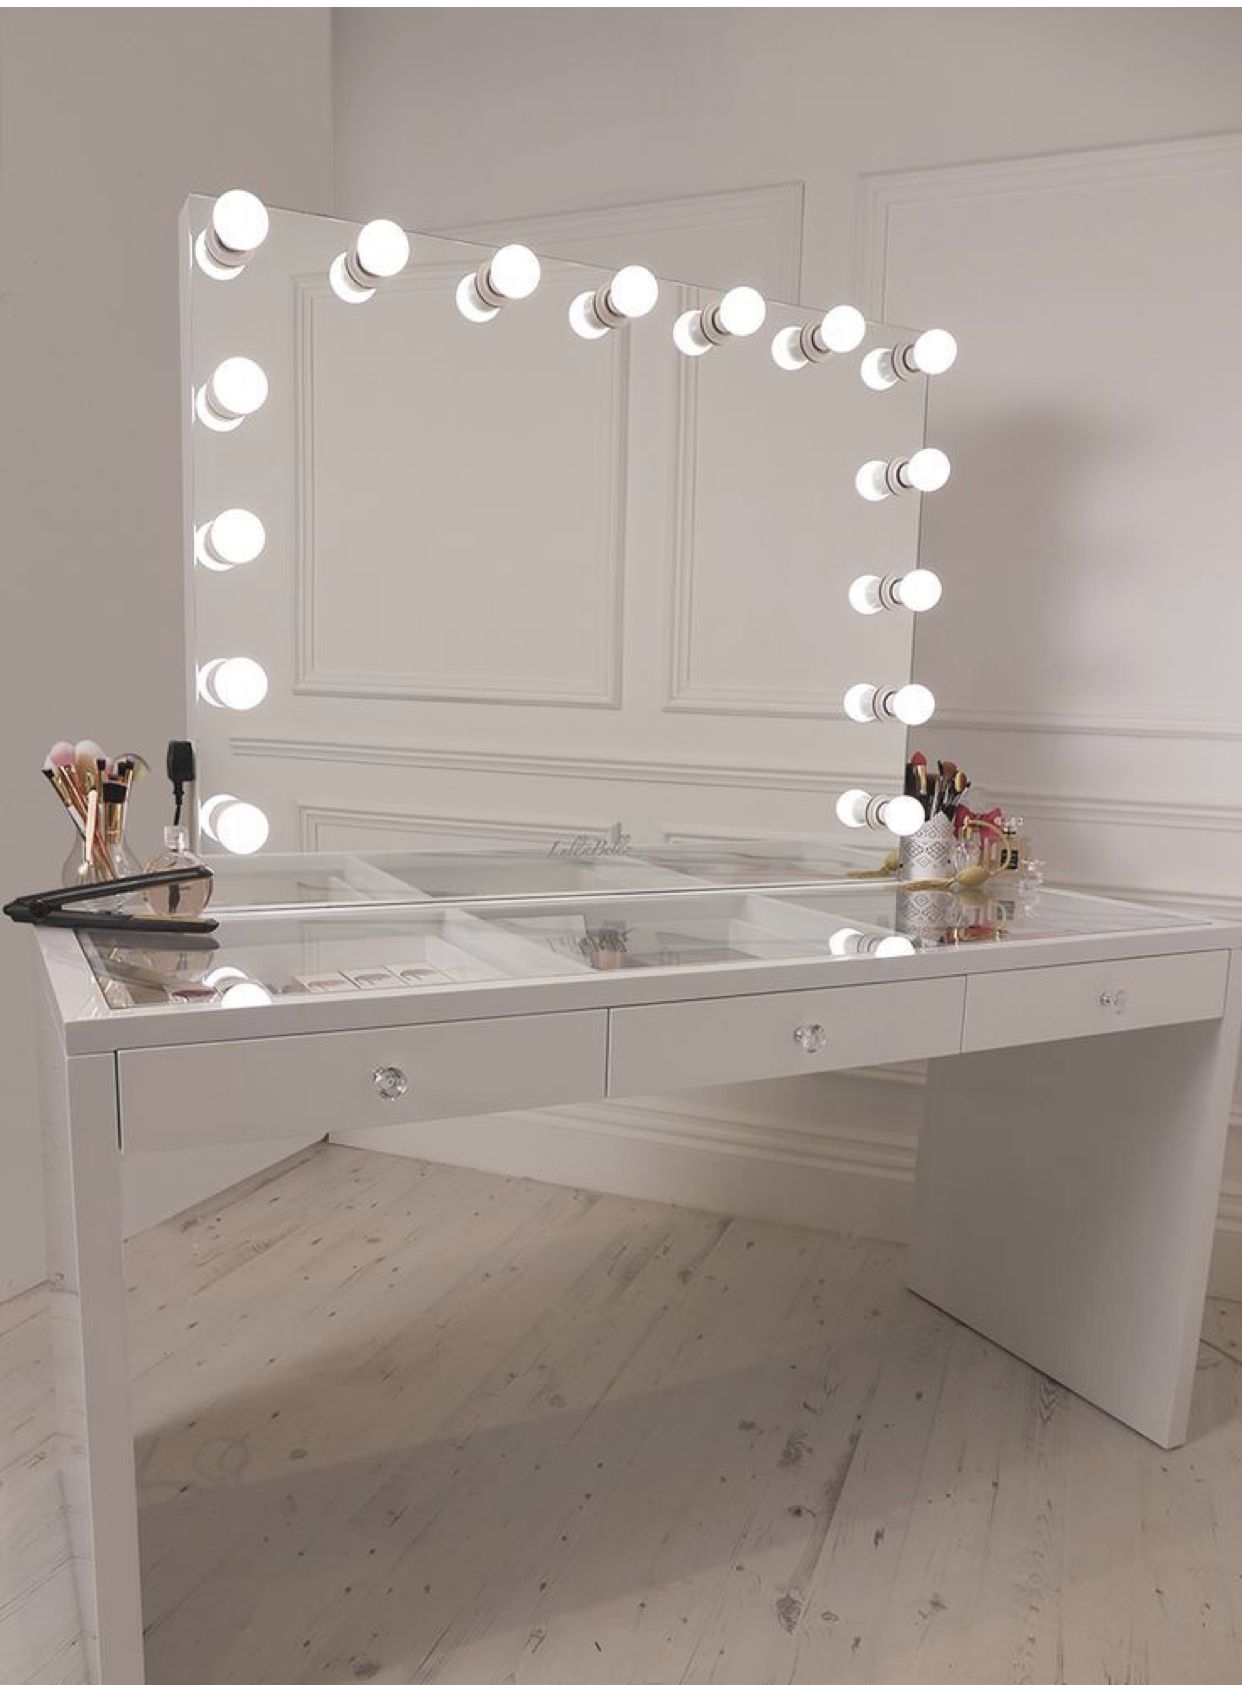 Dressing Table Mirror With Lights, Makeup Desk With Light Up Mirror